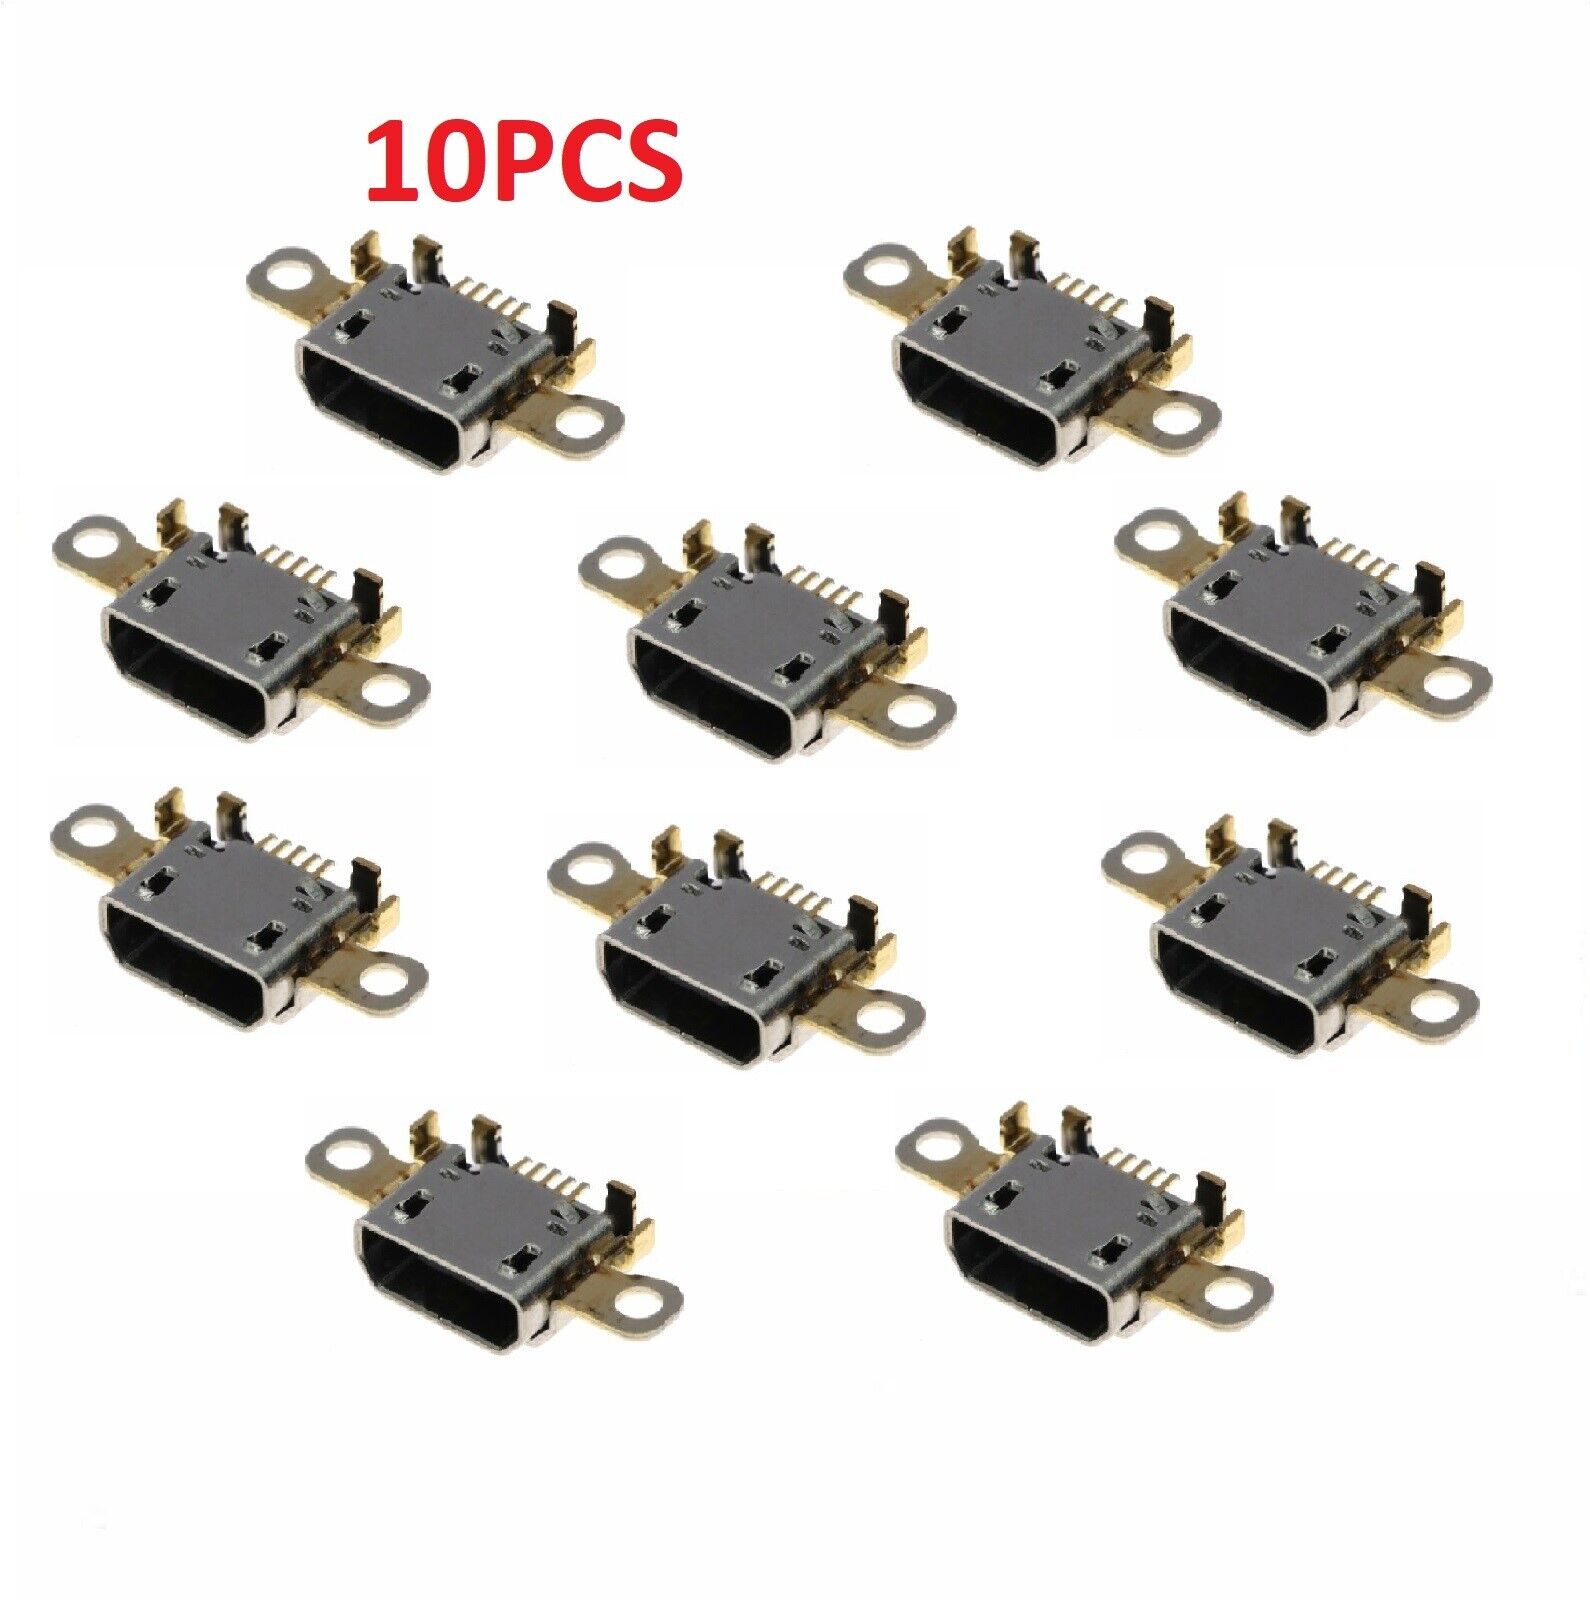 10 x Micro USB Charge Port Sync For Amazon Kindle Fire 7 SR043KL 2017 7th Tablet Unbranded/Generic Does not apply - фотография #3